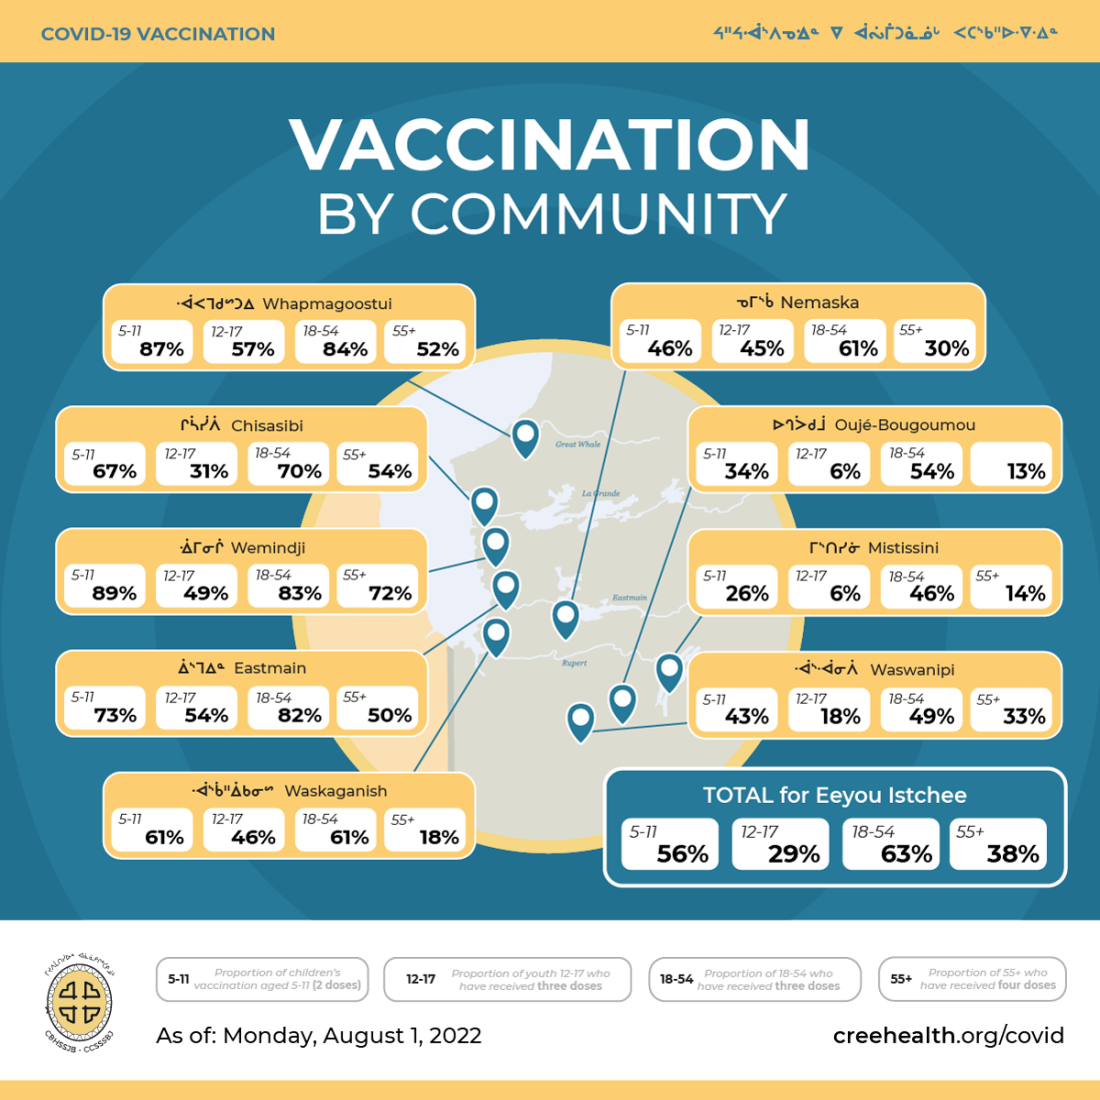 Map of vaccination coverage in each community of Eeyou Istchee as of August 1 2022